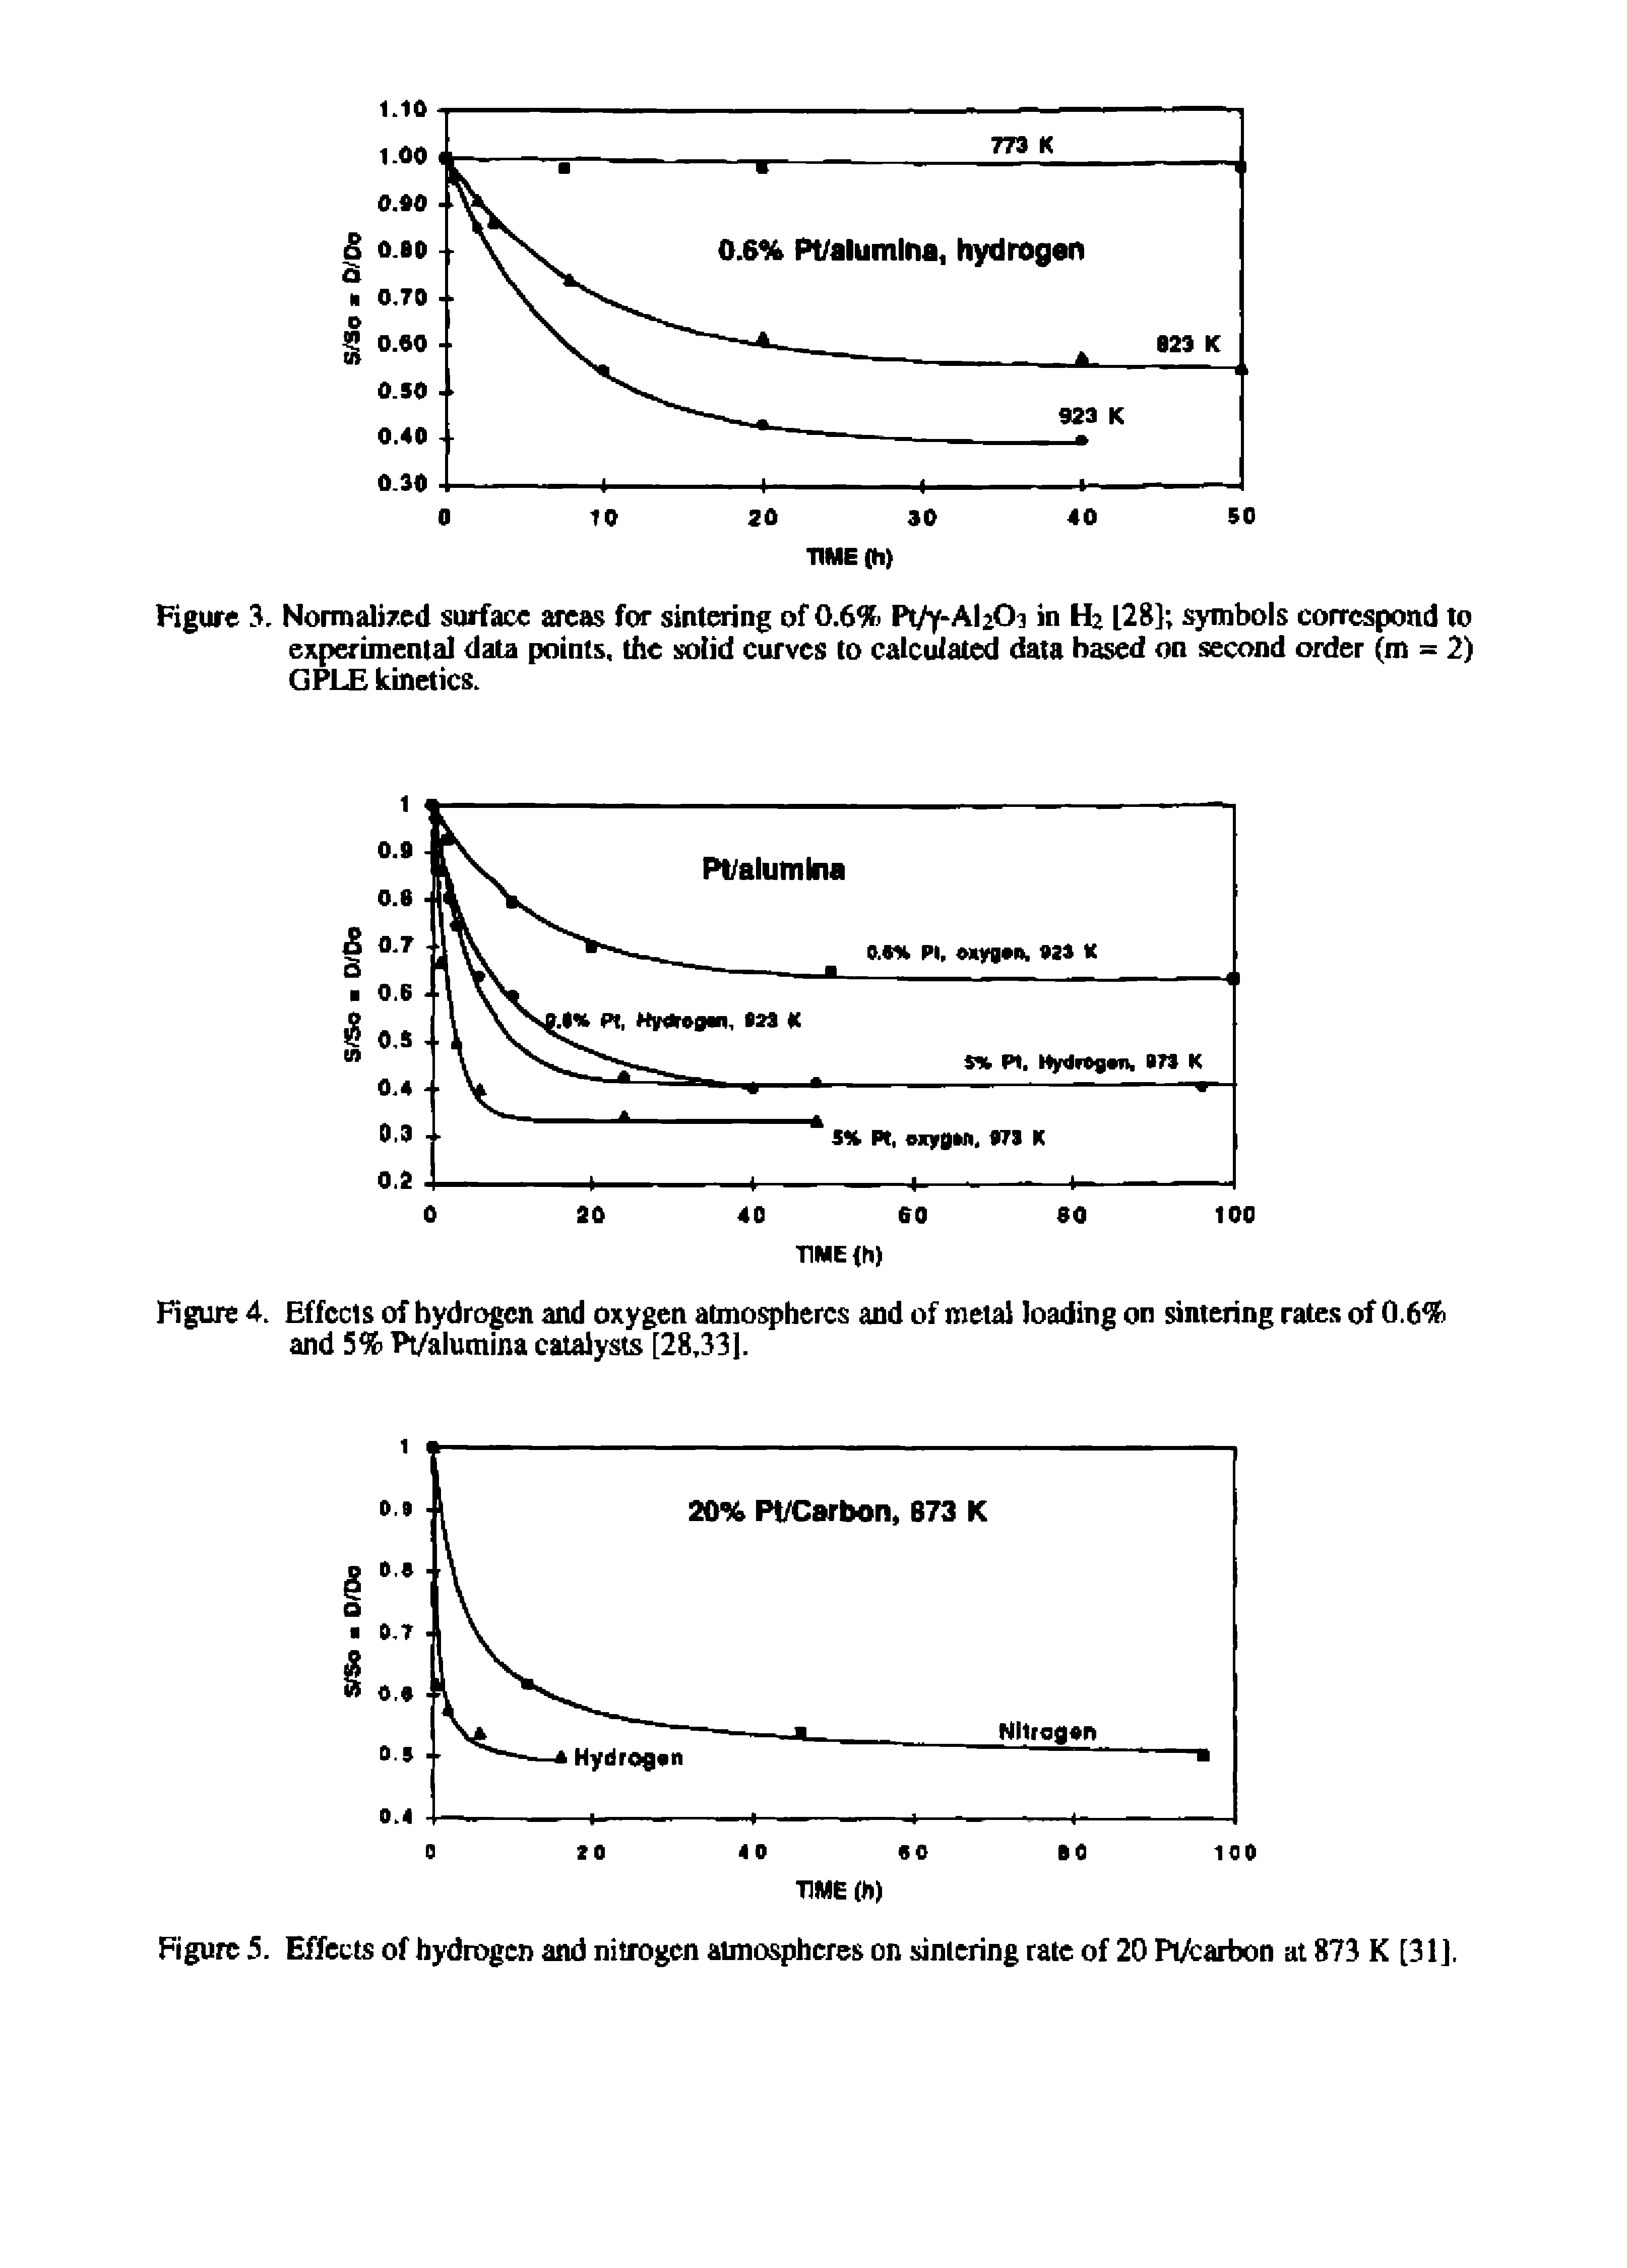 Figure 4. Effects of hydrogen and oxygen atmospheres and of metal loading on sintering rates of 0.6% and 5% Pt/alumina catalysts [28,331.